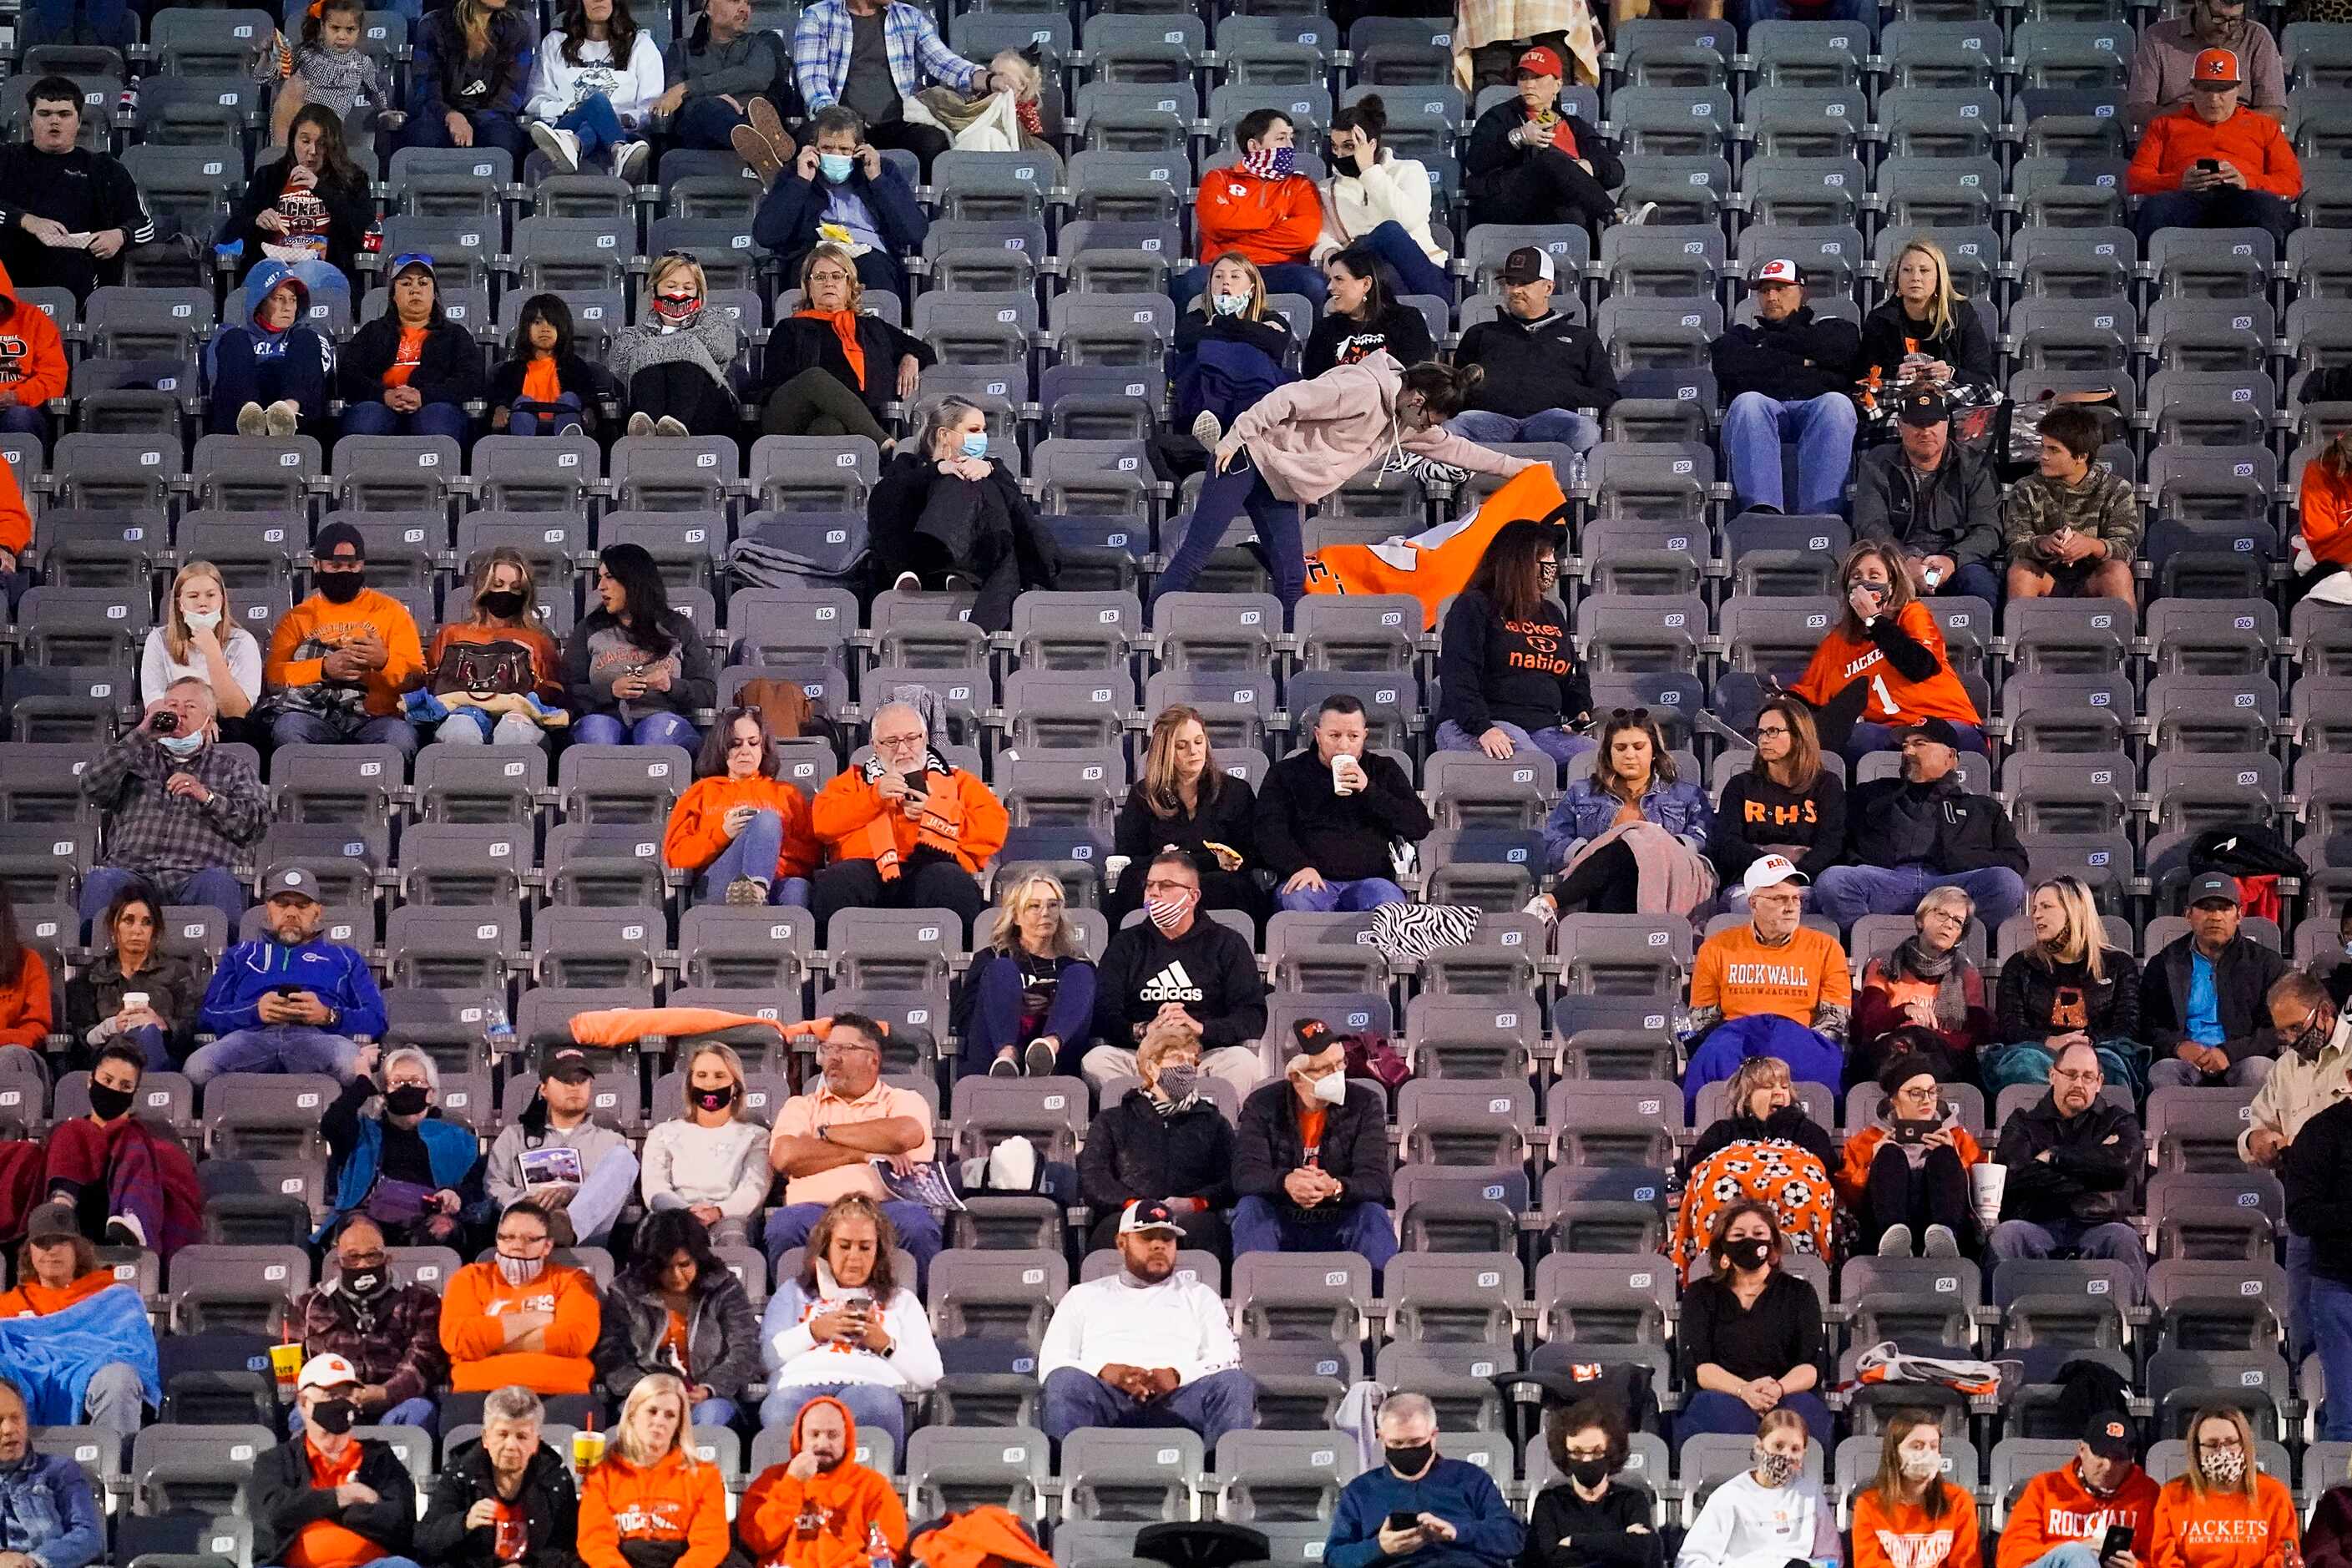 Socially distant Rockwall fans take their seats before a high school football game against...